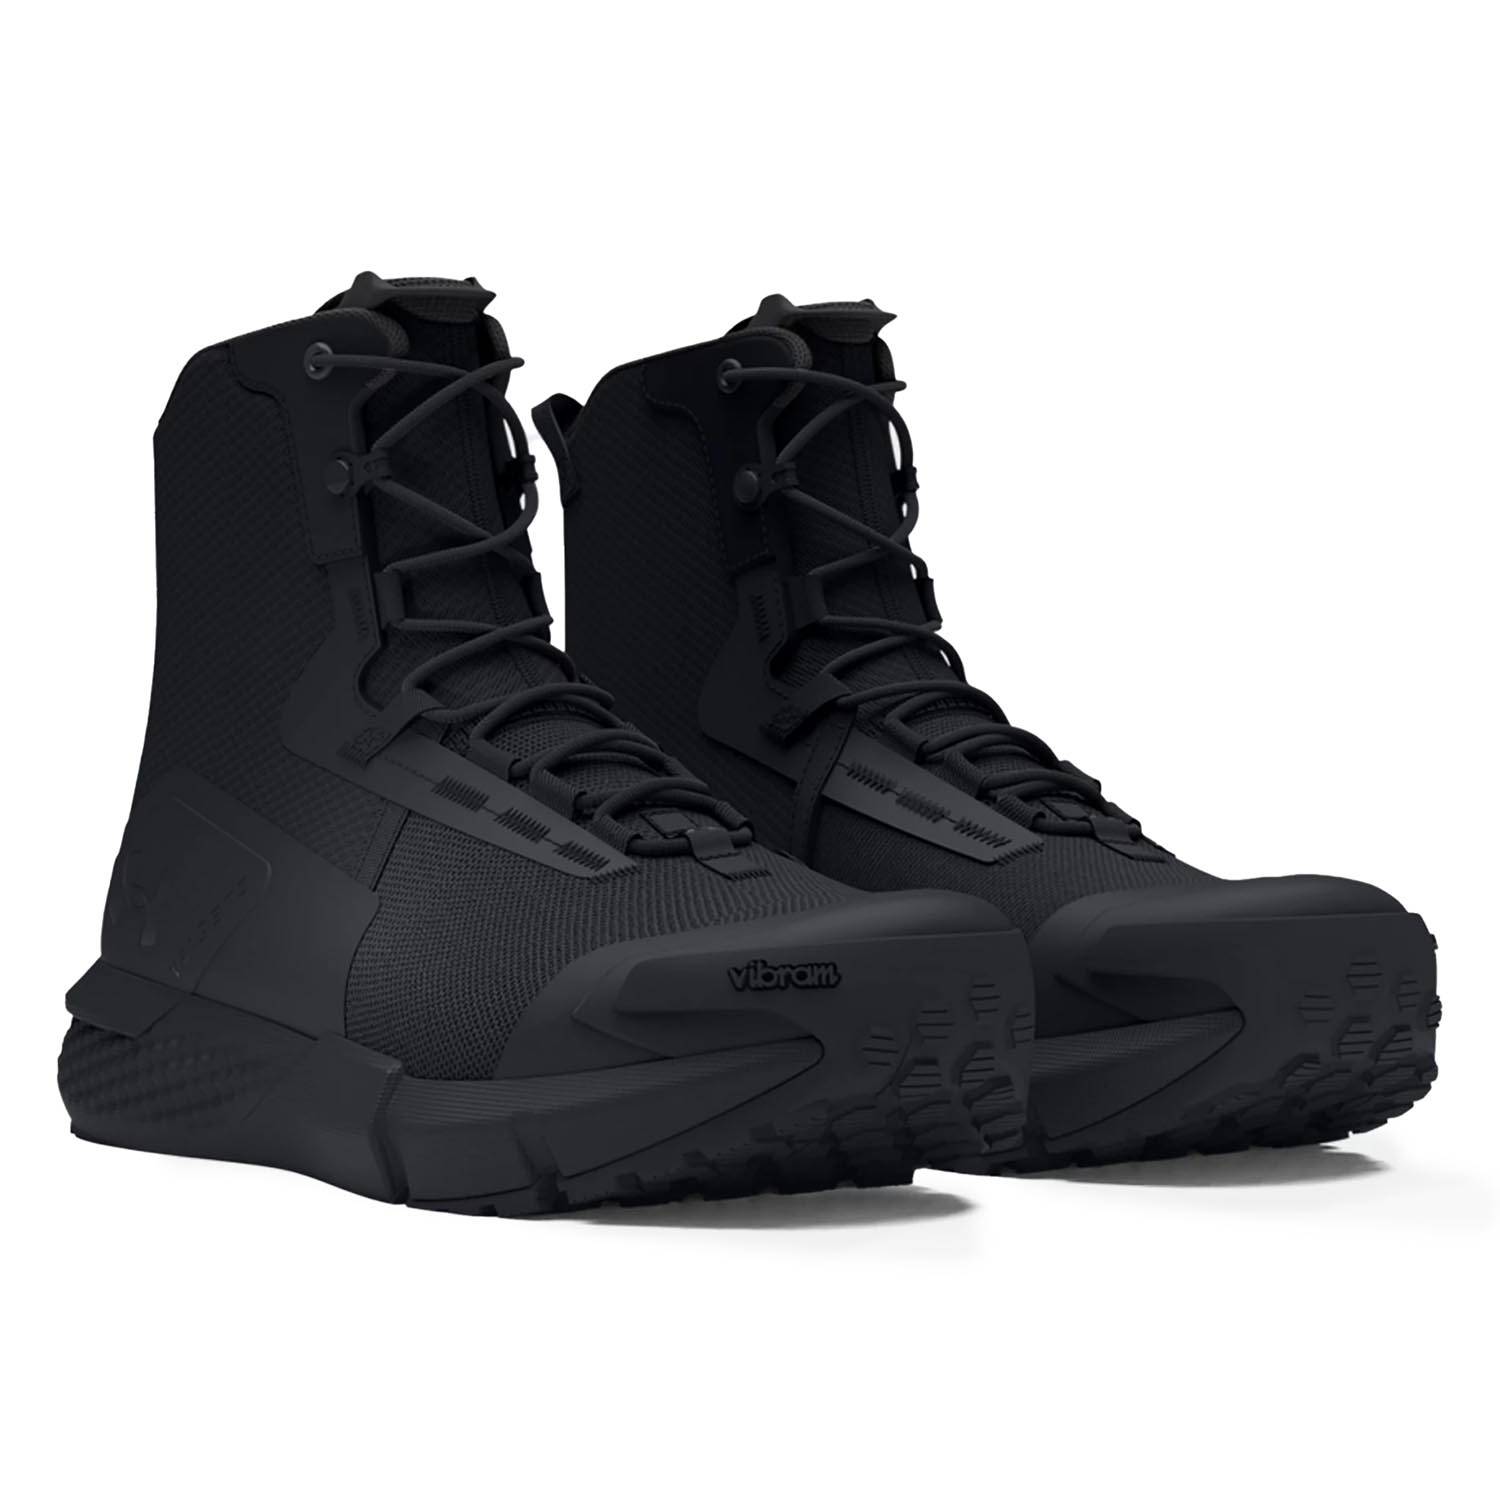 Under Armour Men's Charged Valsetz 8 Tactical Boots